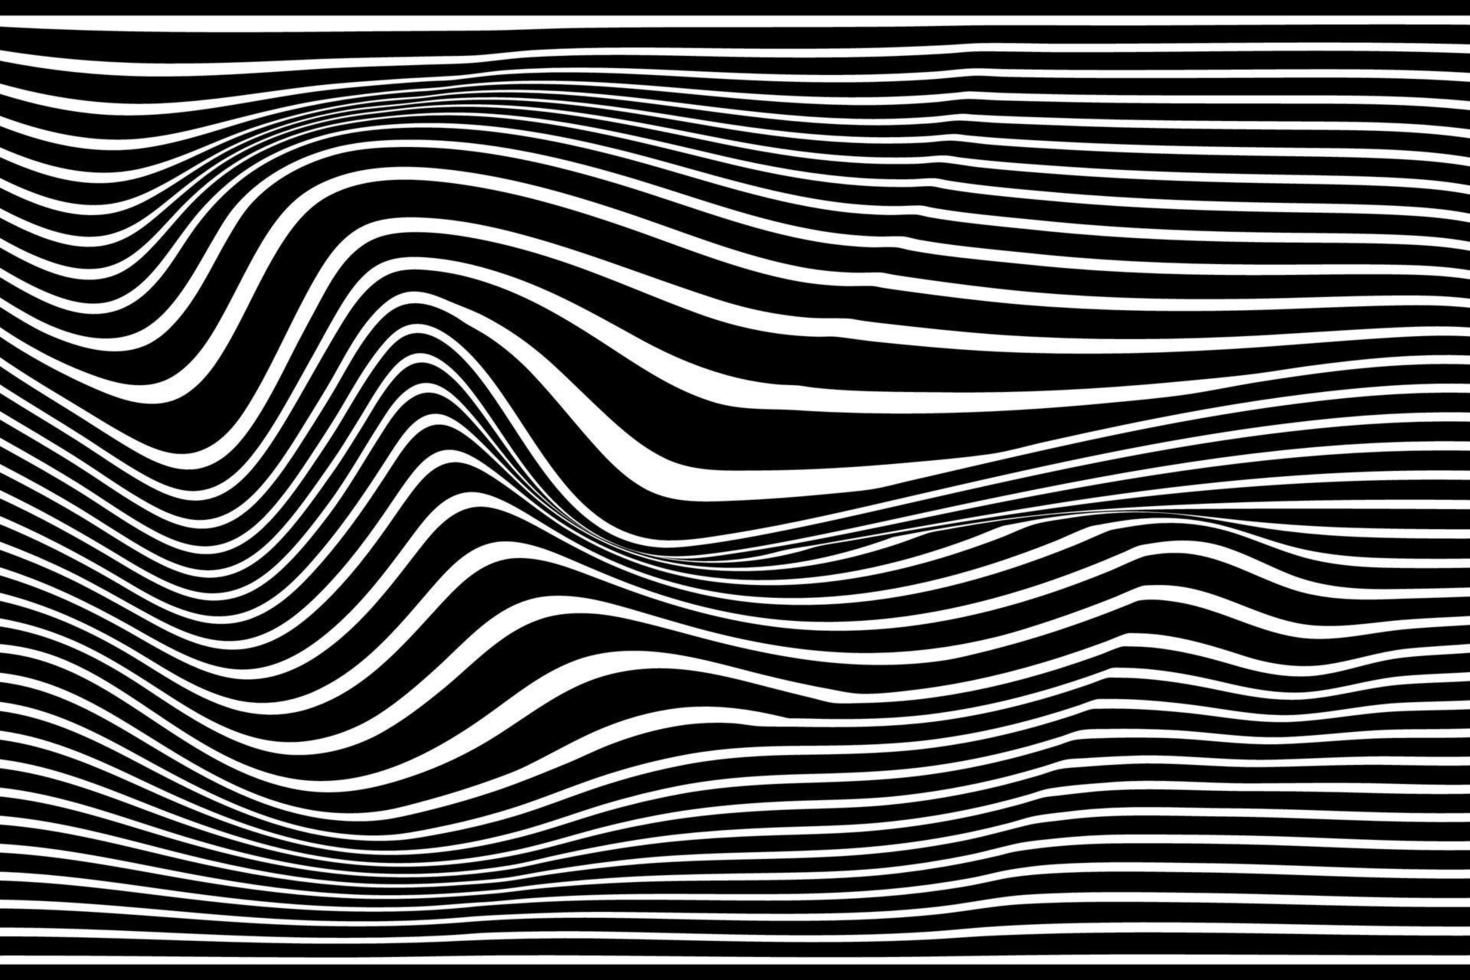 Black and white abstract wave line stripe background. op art optical illusion wavy striped vector illustration.